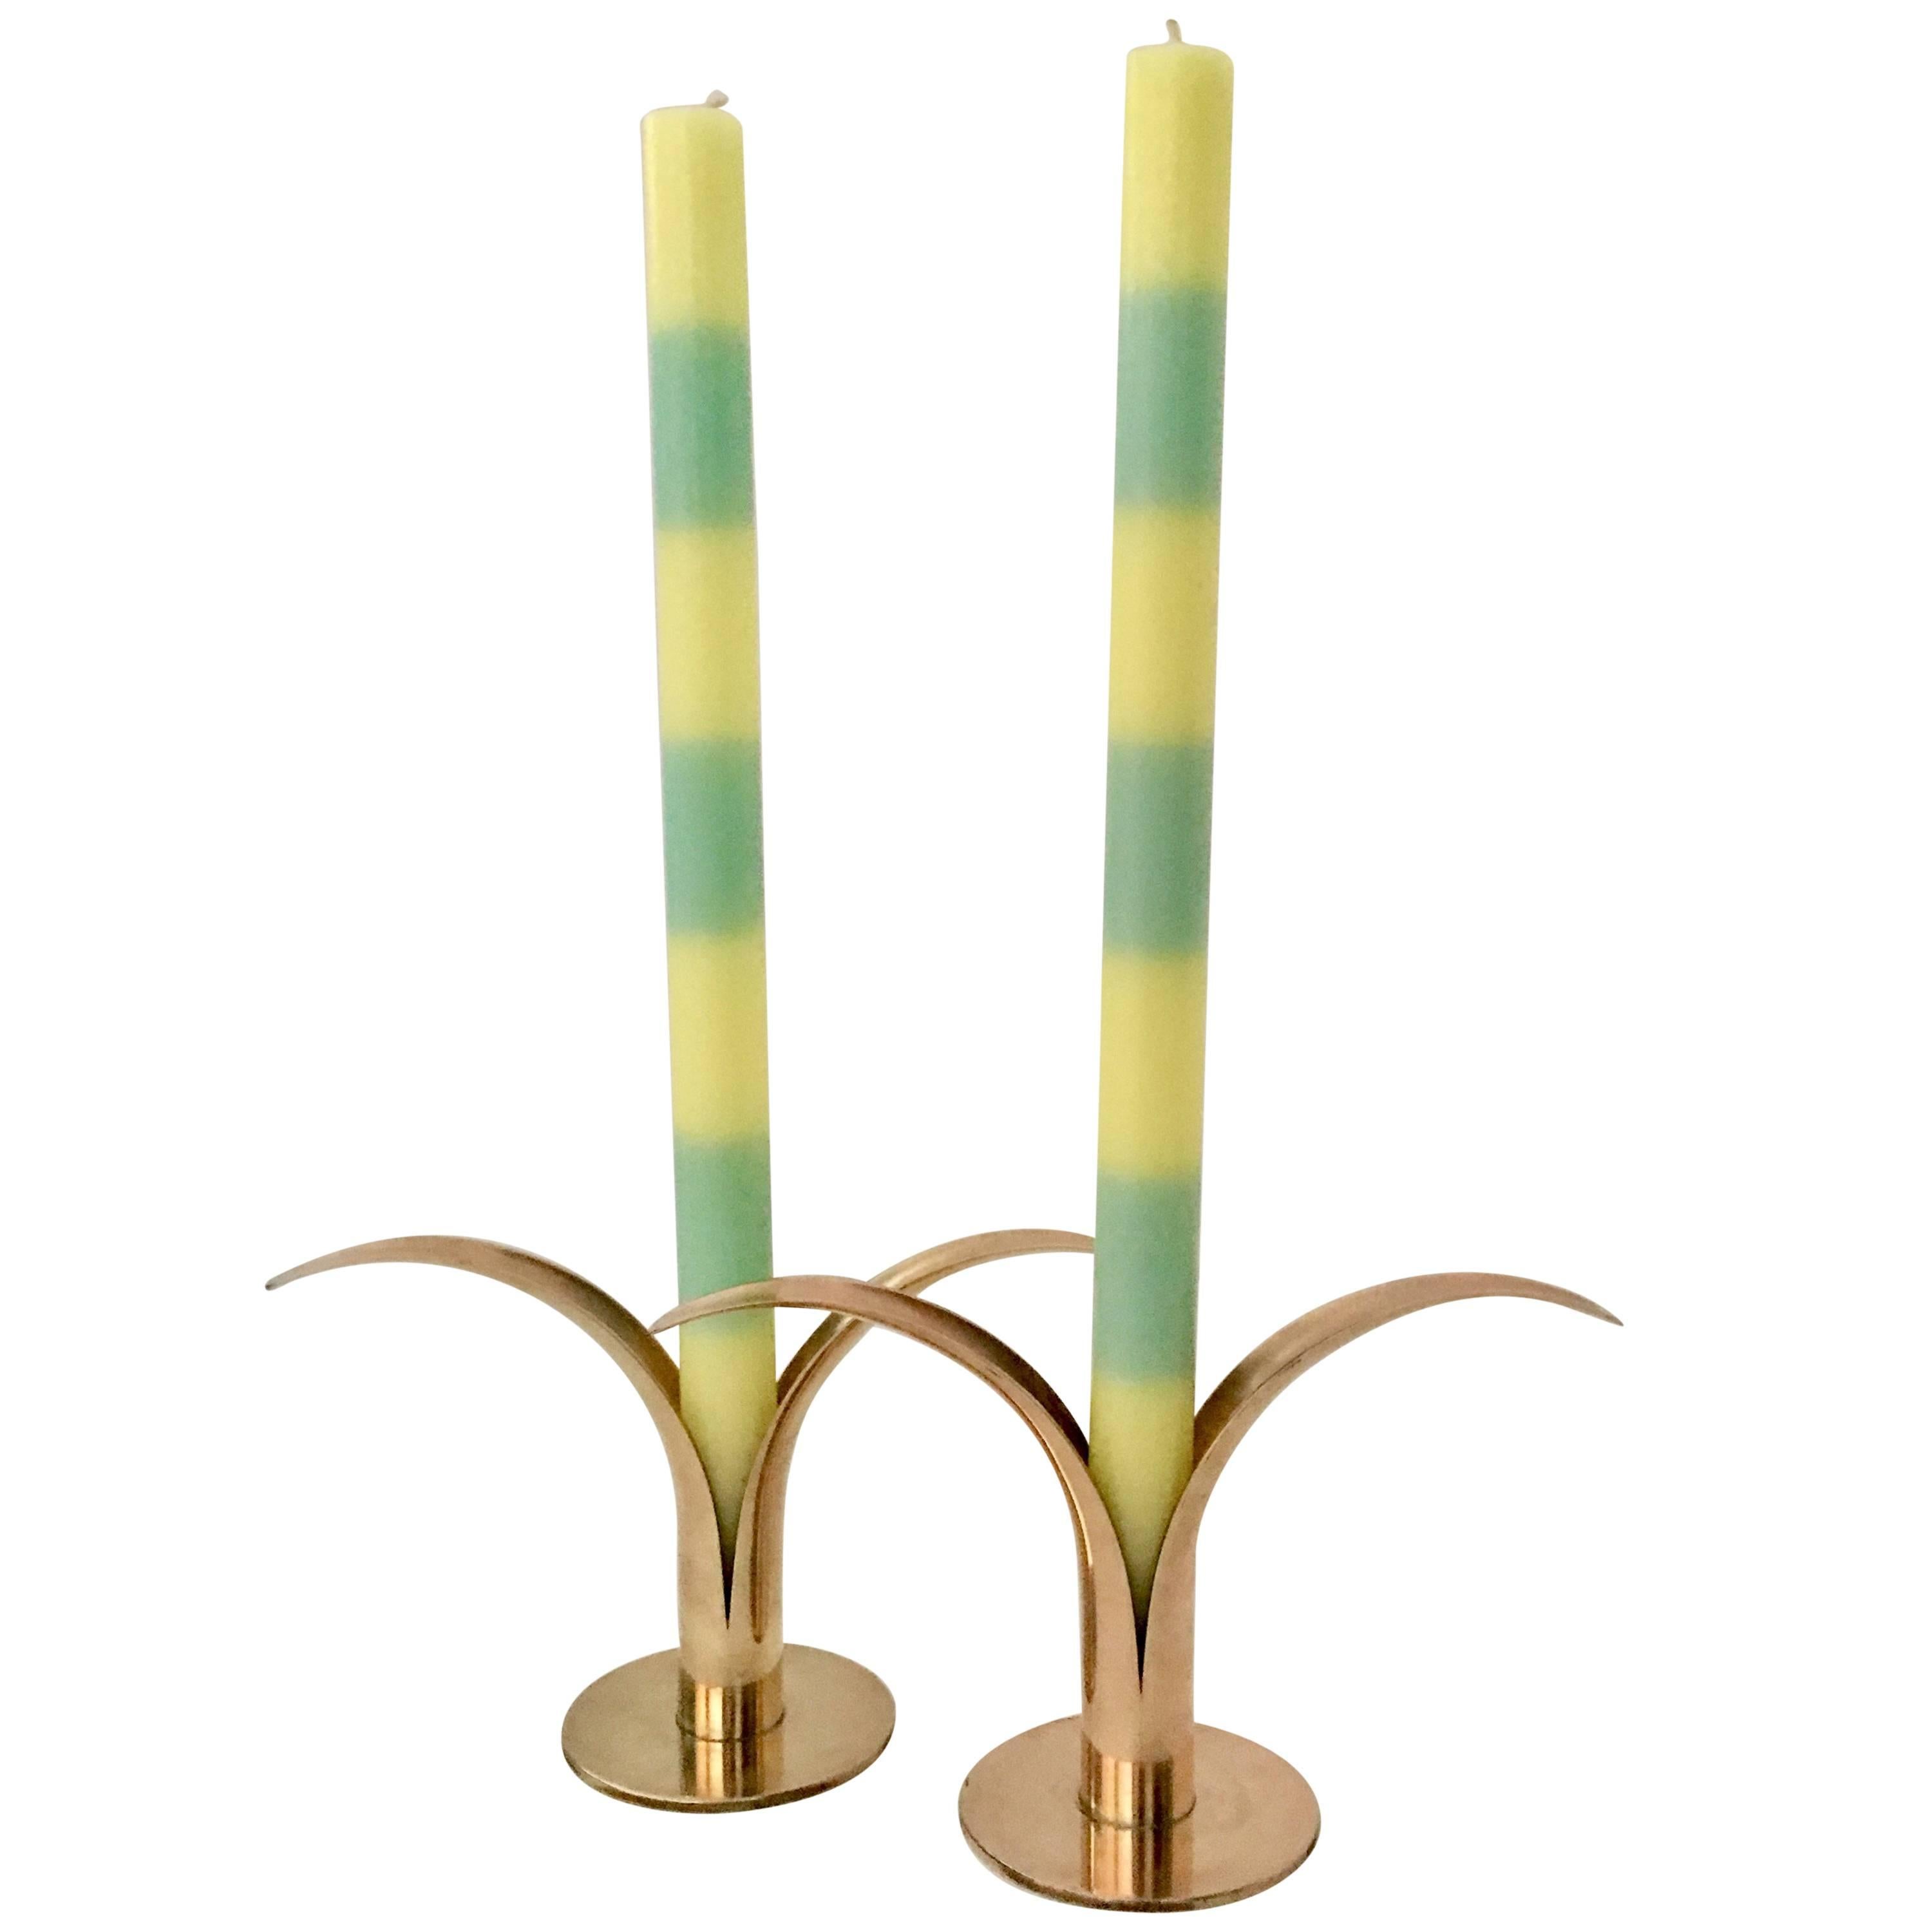 Pair of Mid-Century Swedish Brass "Lily" Candle Holders by, Ystad